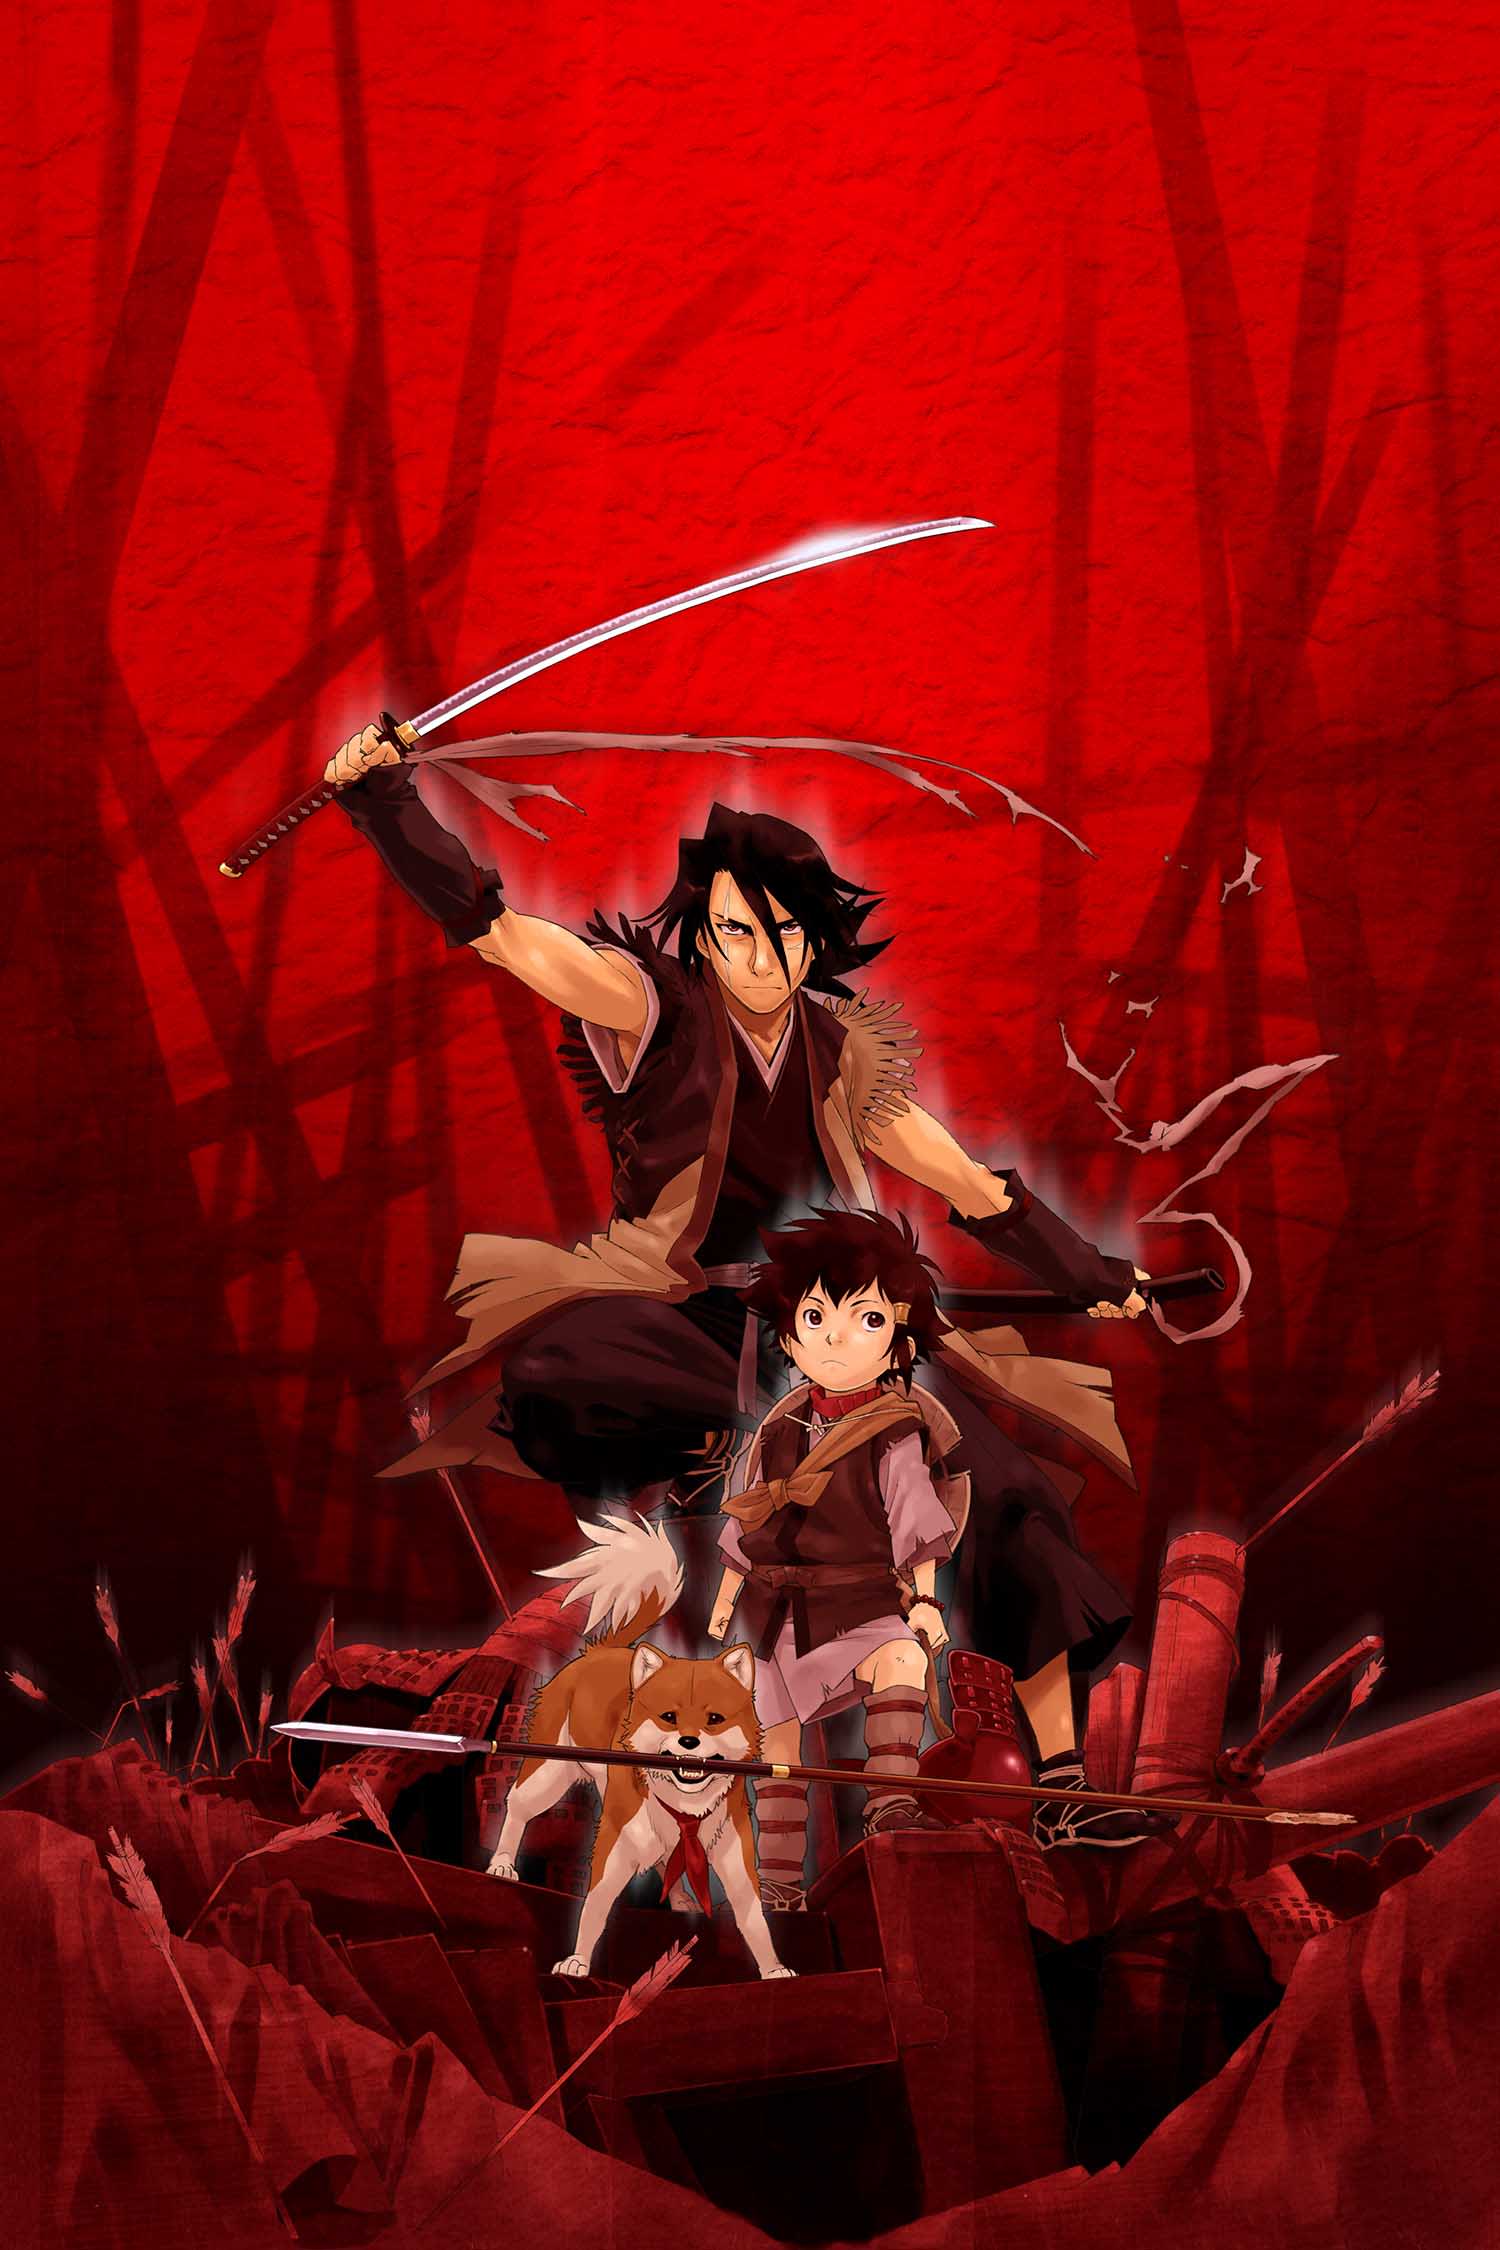 Sword of the Stranger is the only reason i have funimation. Is there a way  to buy or download this movie forever without having to be subscribed? The  app is horrible and